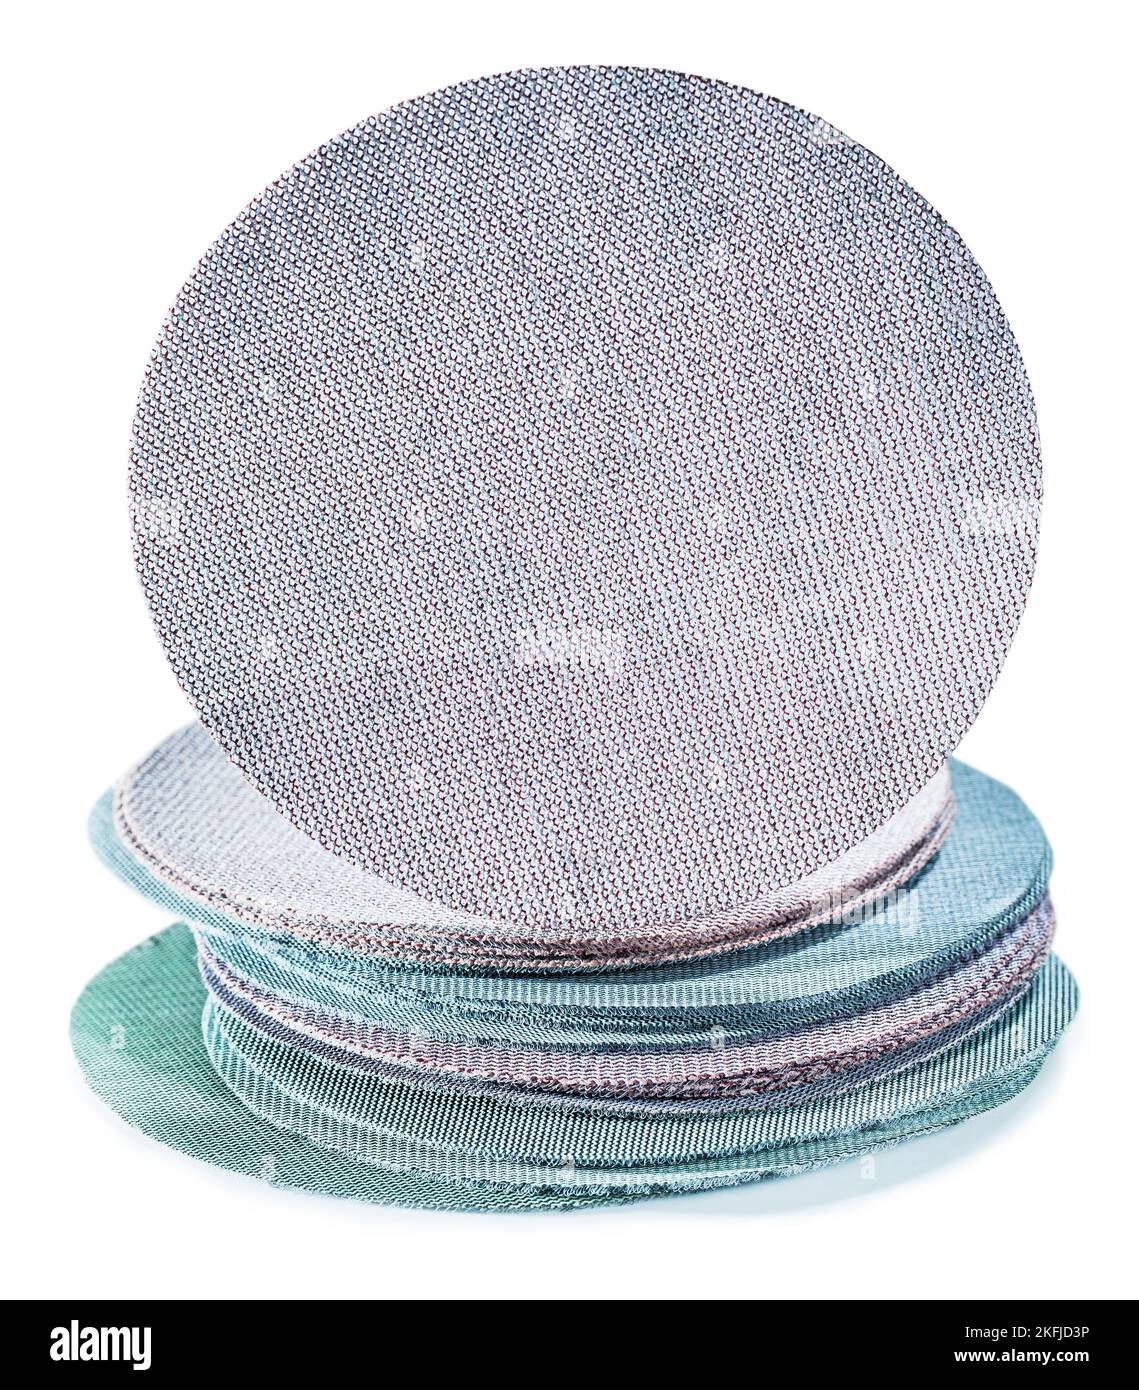 abrasive tools adhesive dustless sanding discs stack with randoms grits isolated Stock Photo